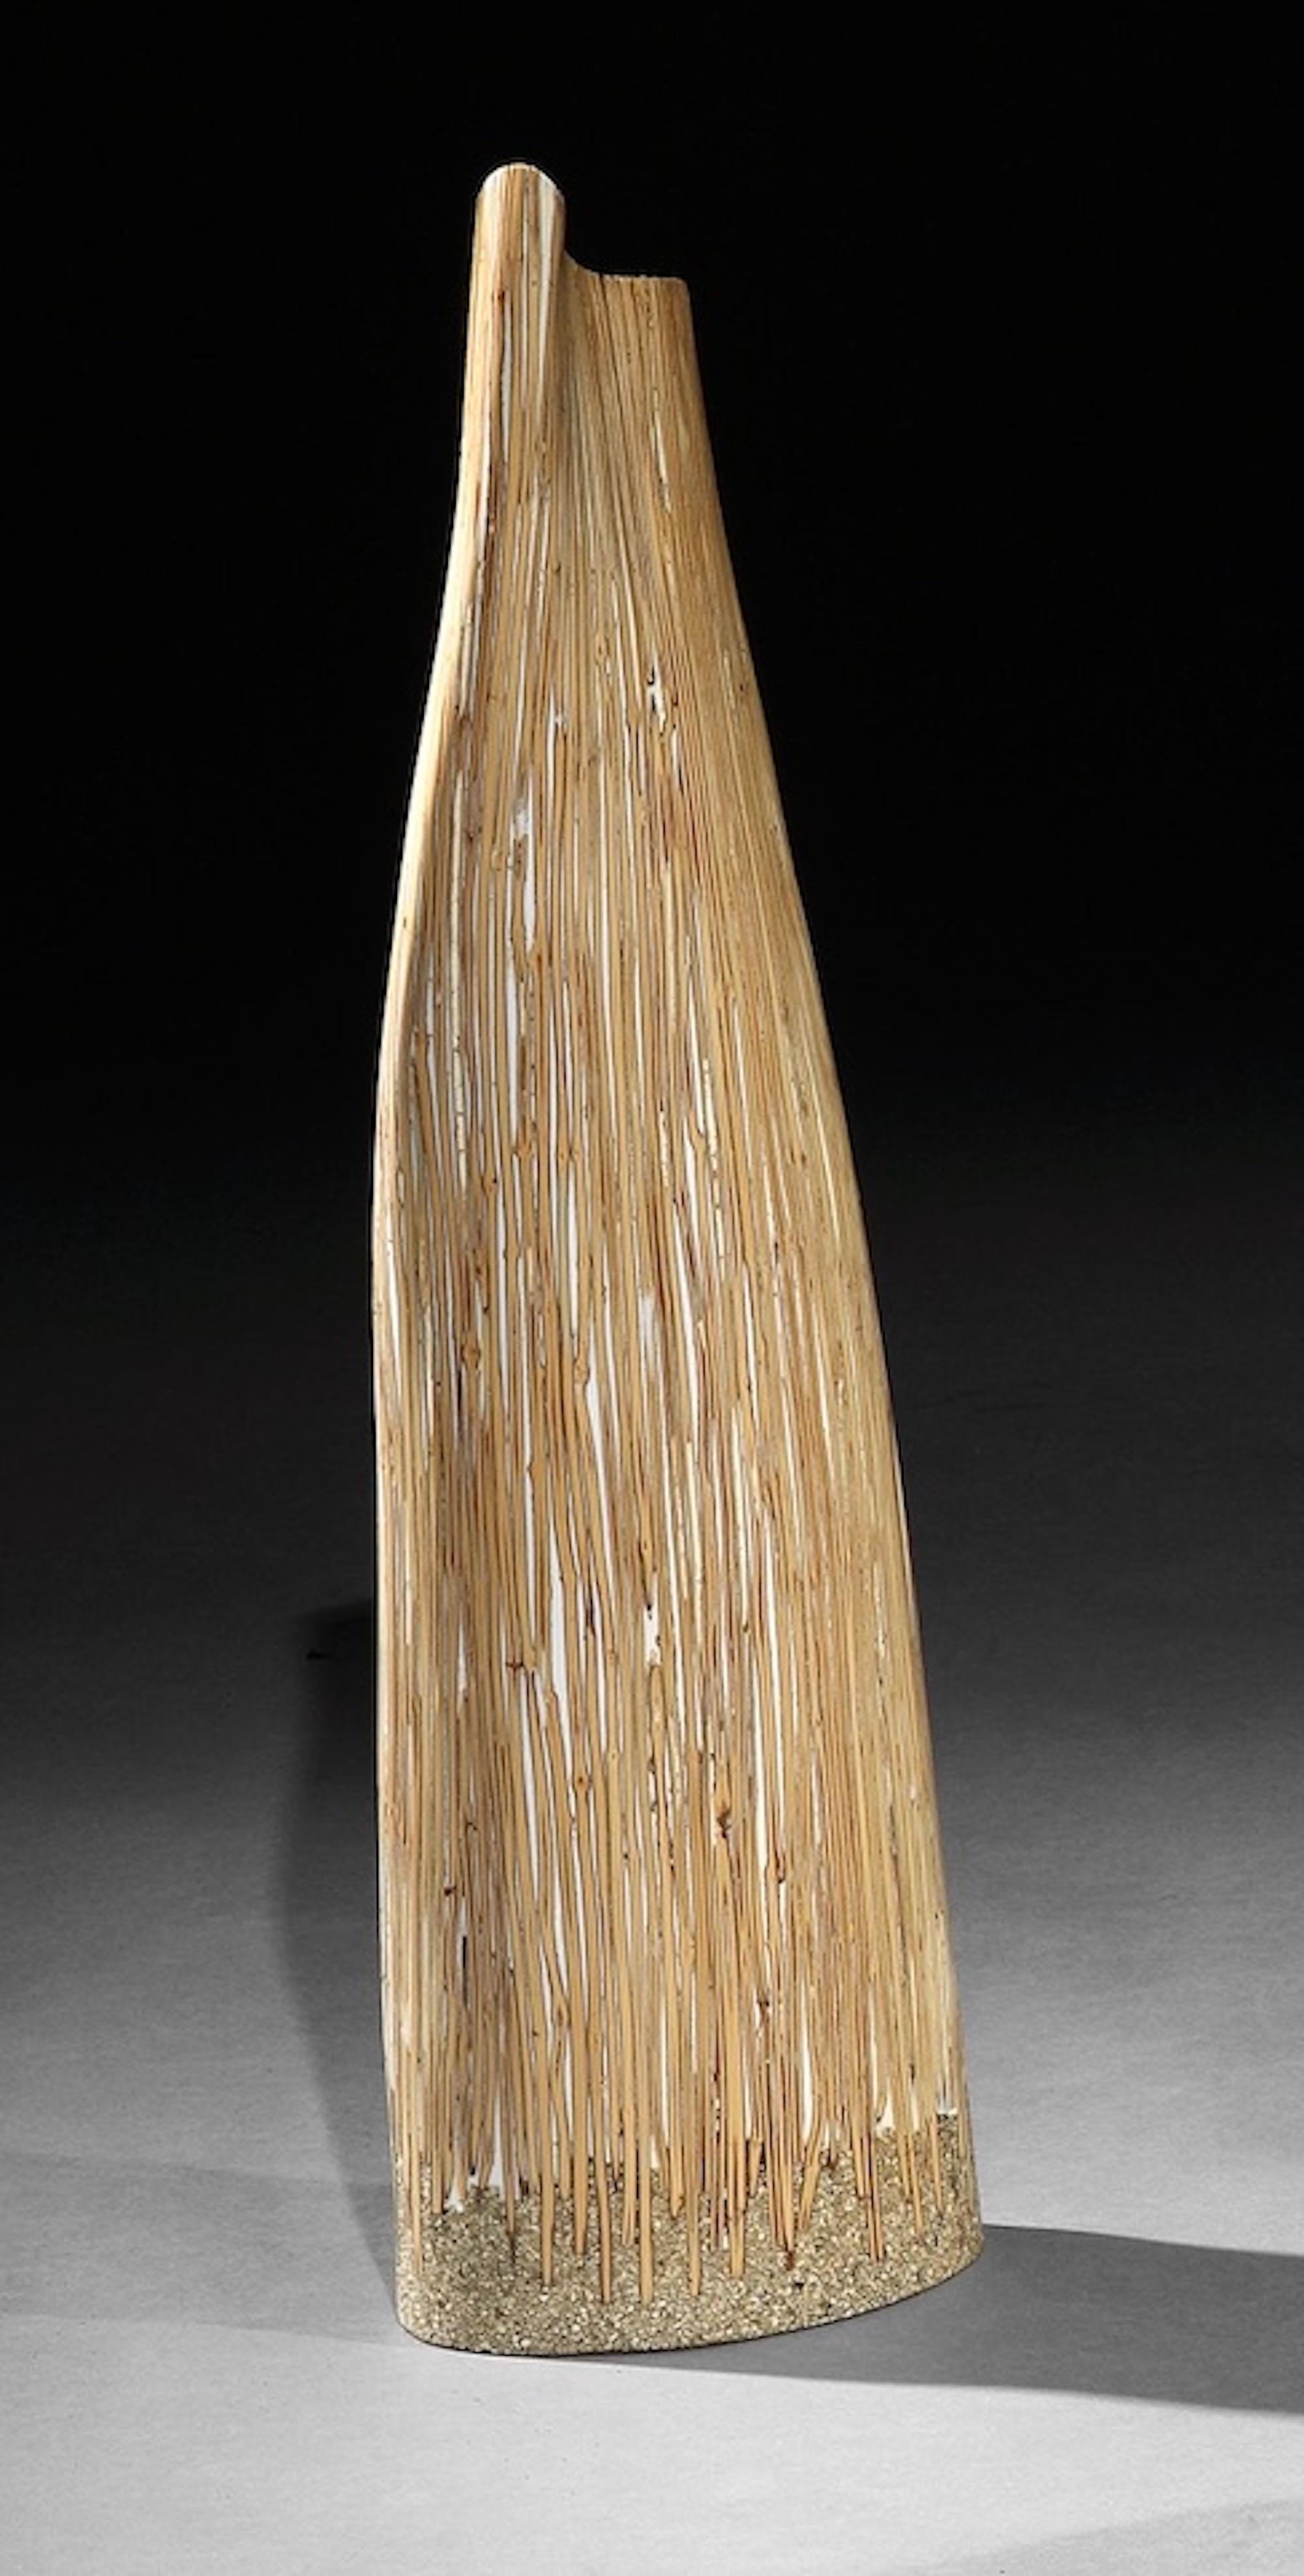 Lusia Robinson: Bamboo sculpture
This sculpture is characteristic of Robinson’s work emphasizing materiality within form integrating indigenous materials with modern technology and applications

- The asymmetrical pared down form of the sculpture